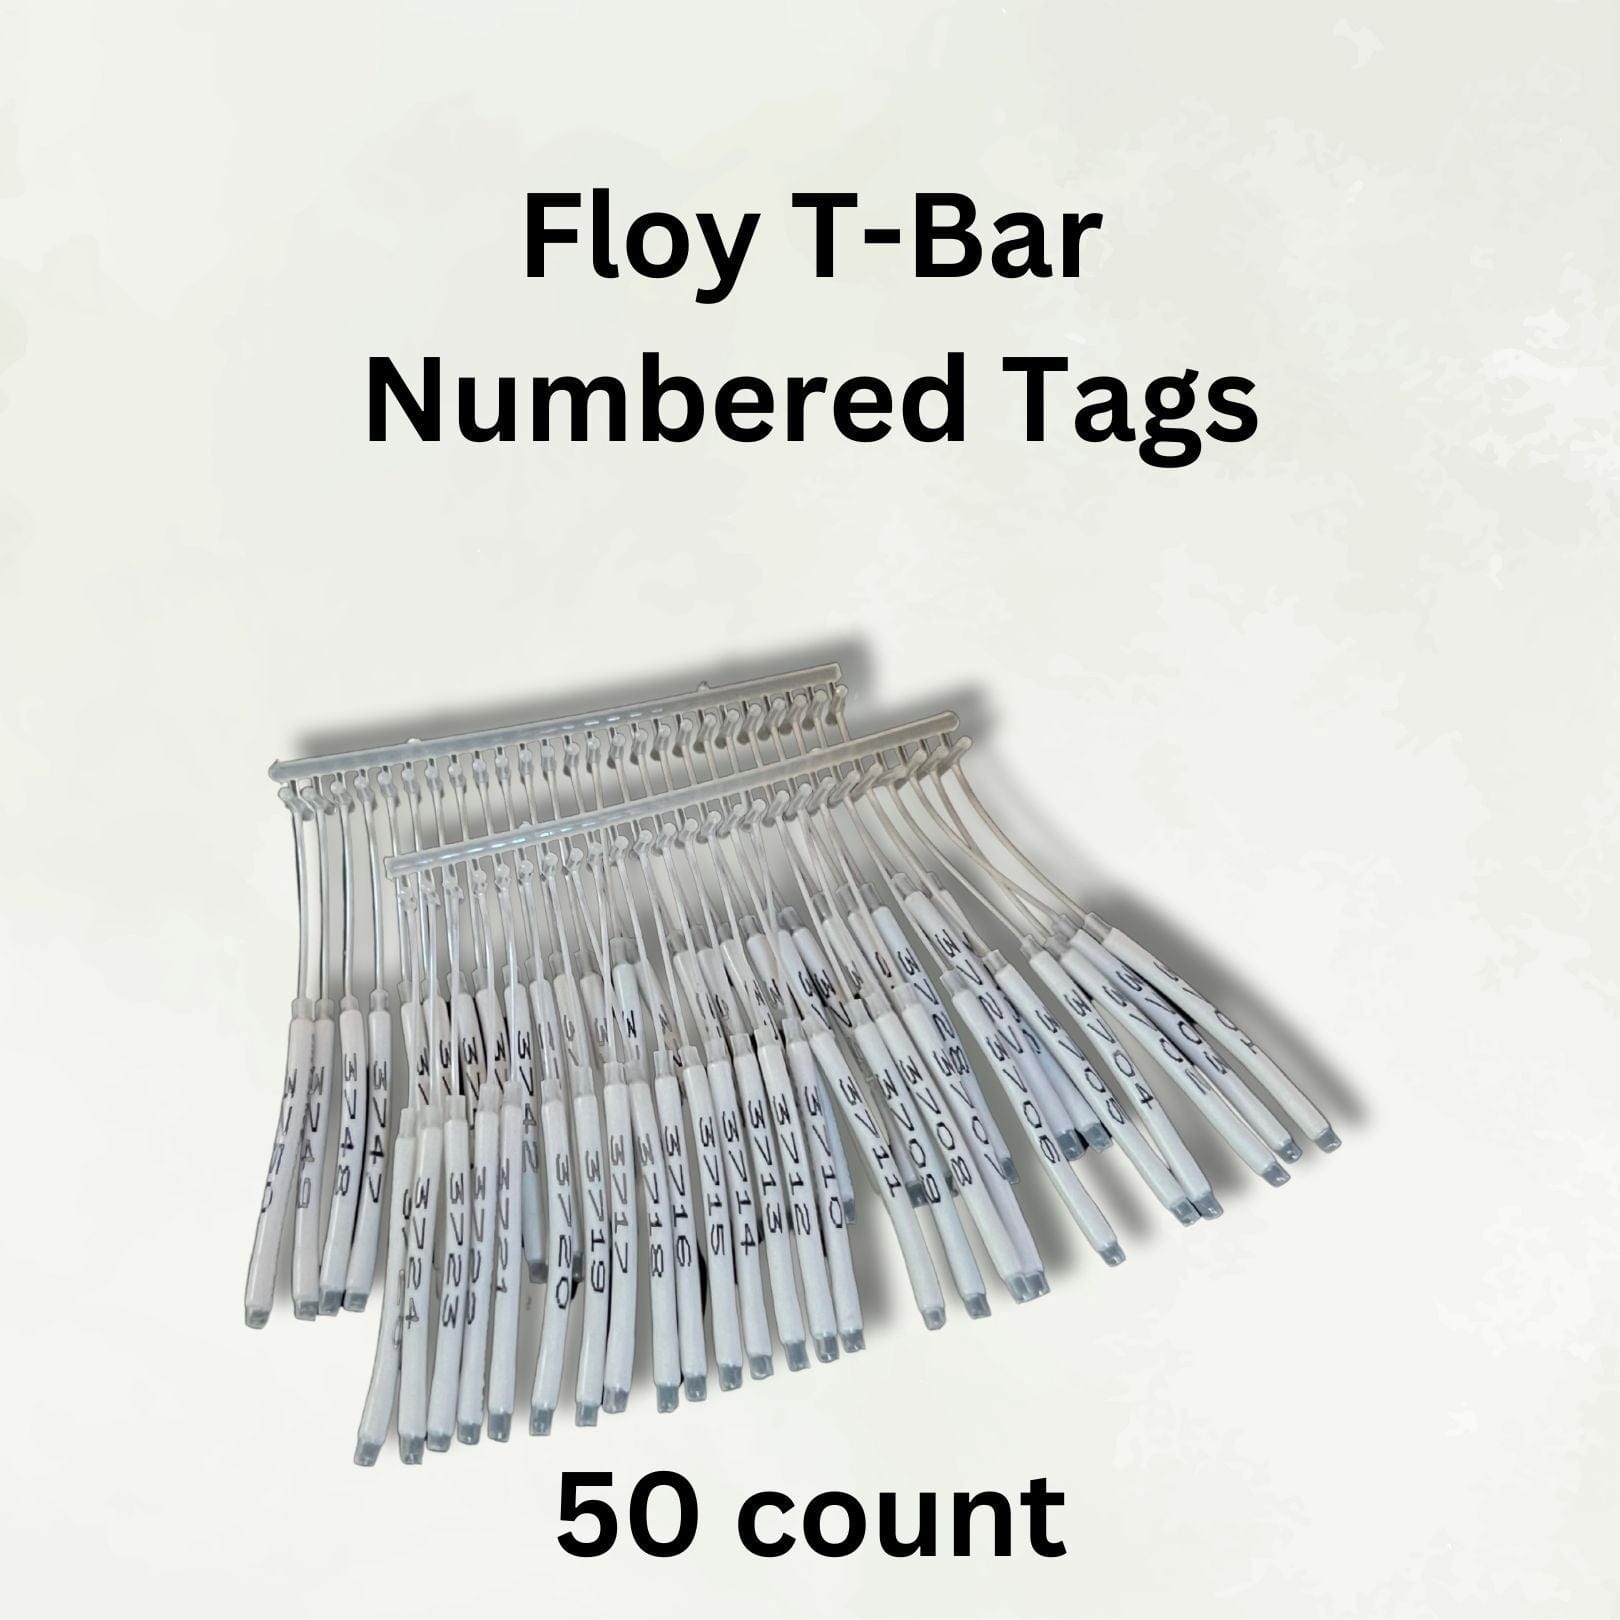 Smith Creek Lake & Pond Professional 50 Extra Numbered Tags Only Fish Tags Floy T-Bar Numbered Tags Numbered Fish Tags for Sale | Floy T-Bar Anchor Fish Tags